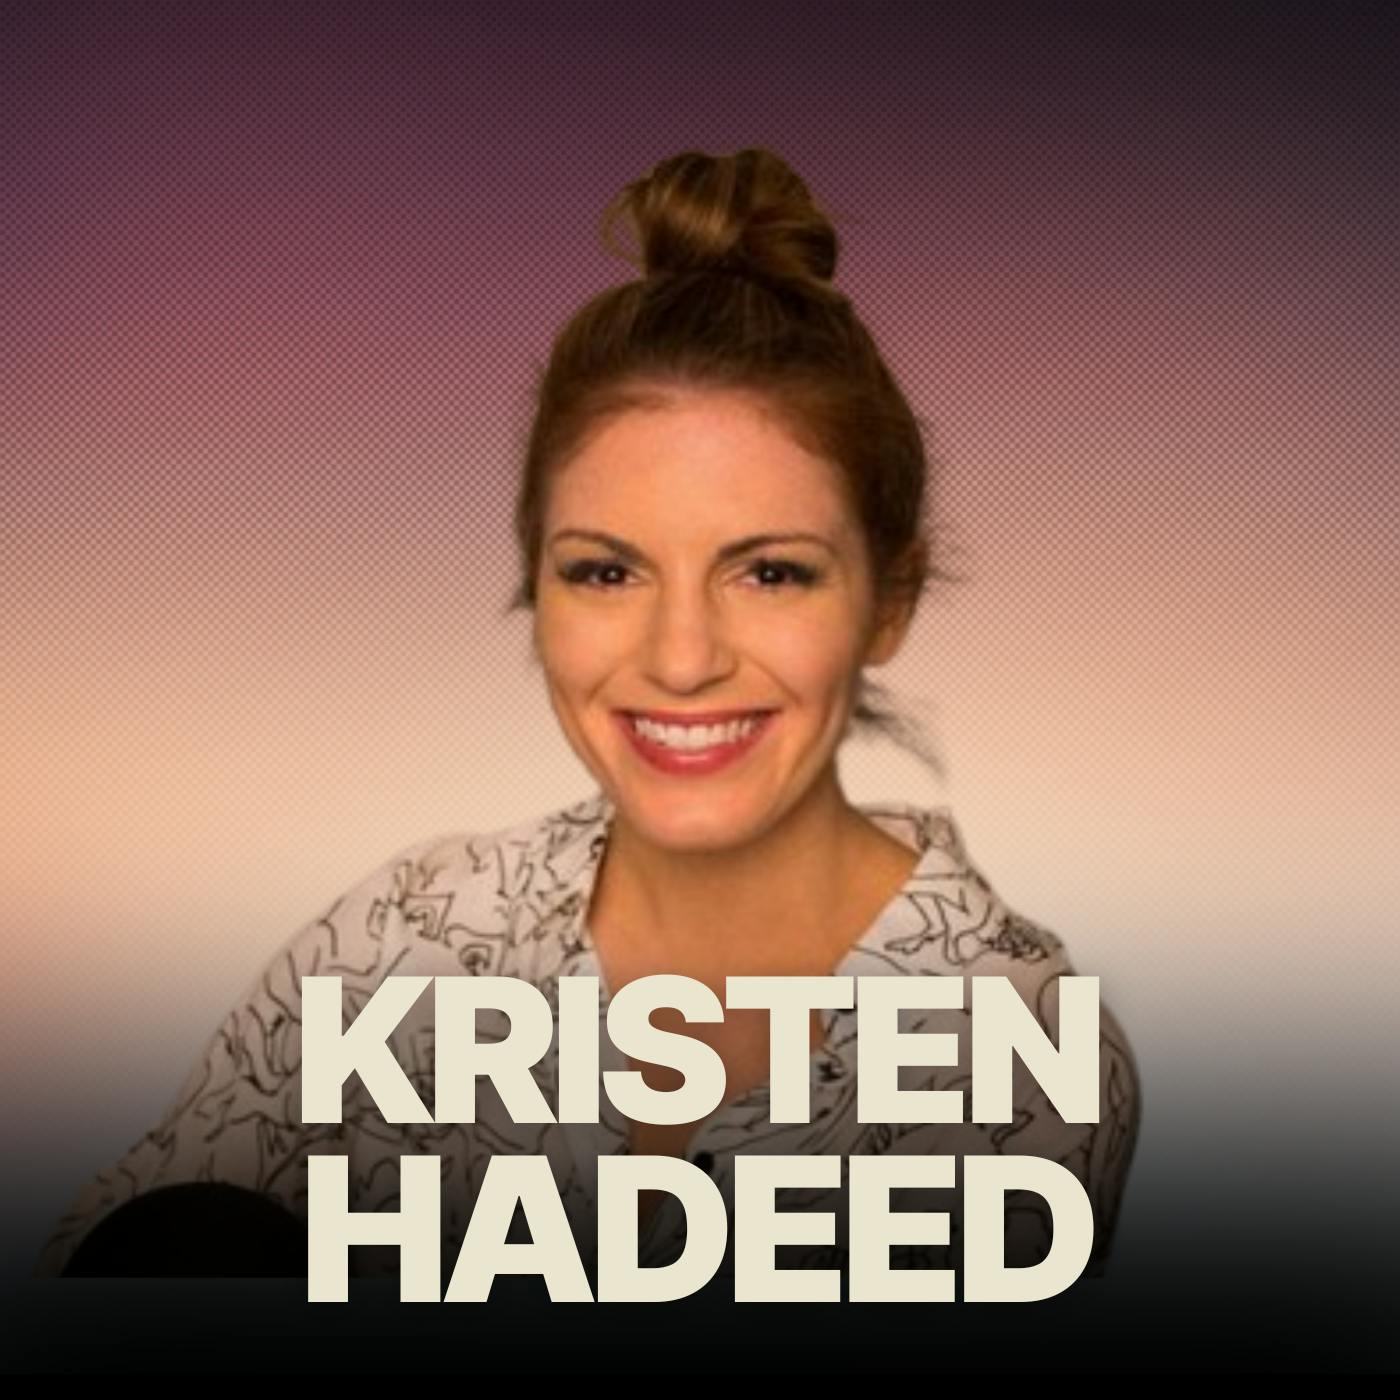 Authentic Leadership w/ Kristen Hadeed | How To Lead & Connect As Your Authentic Self